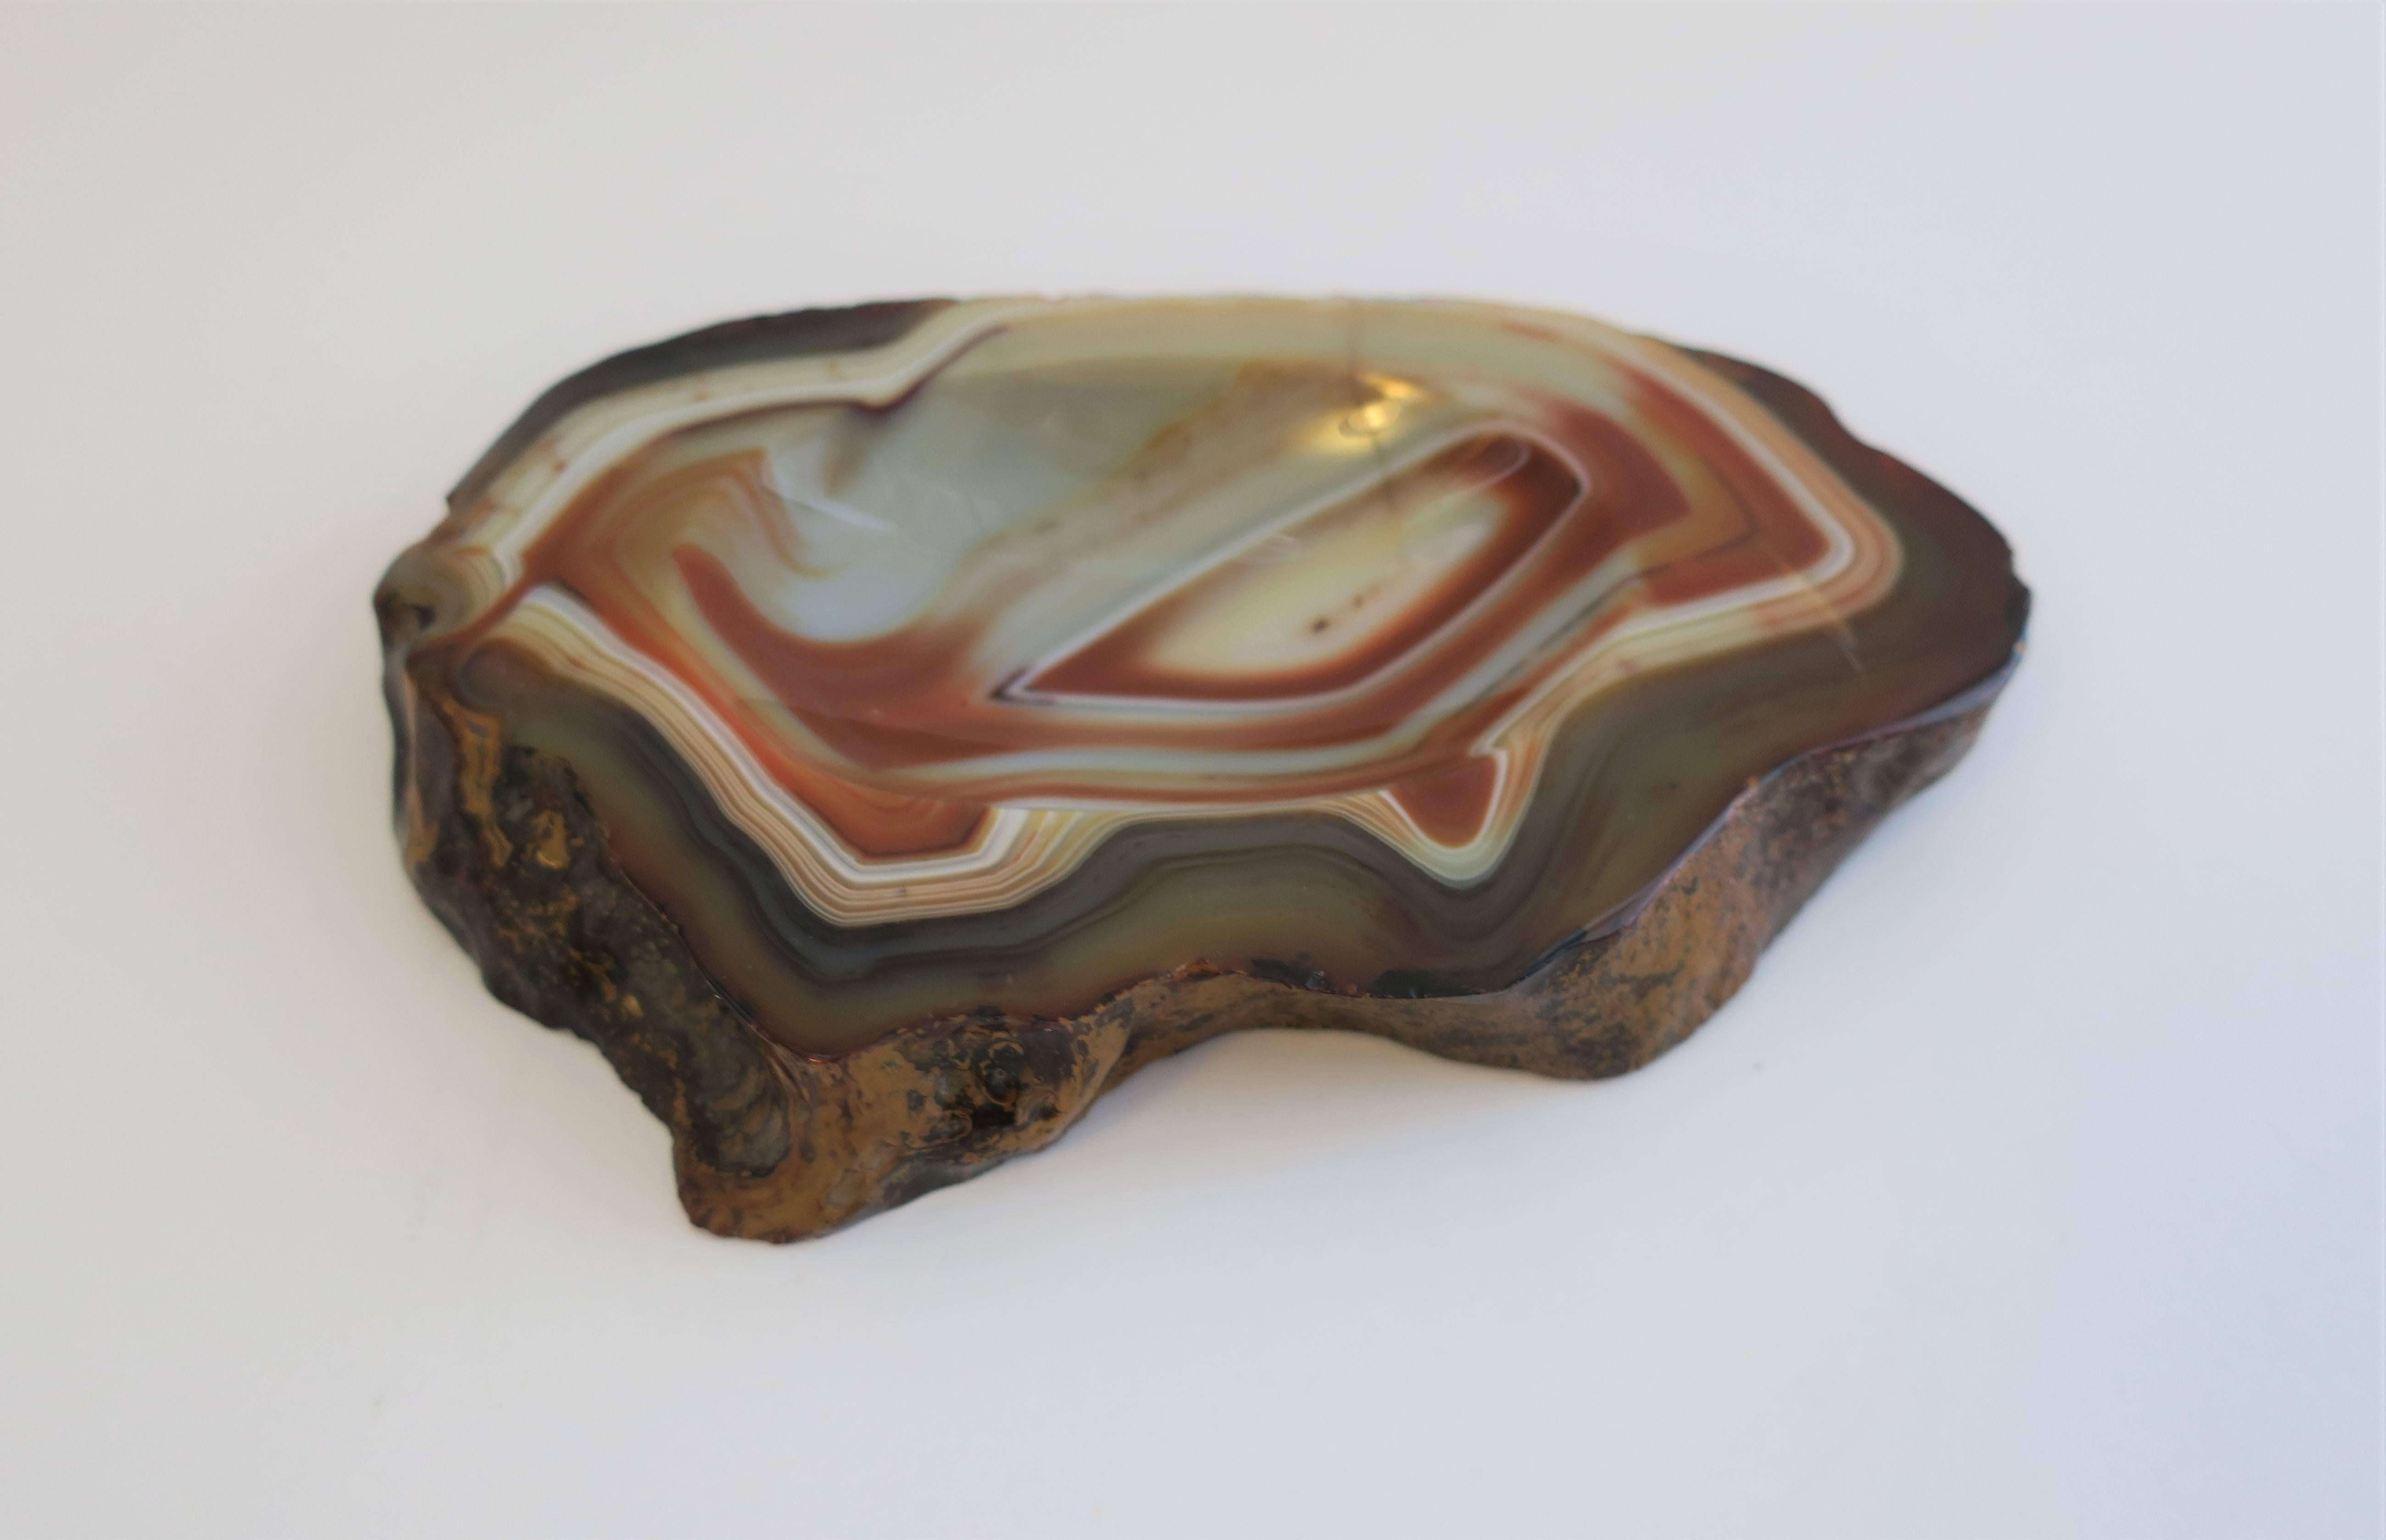 White and Orange Agate Onyx Vessel Bowl or Decorative Object 1